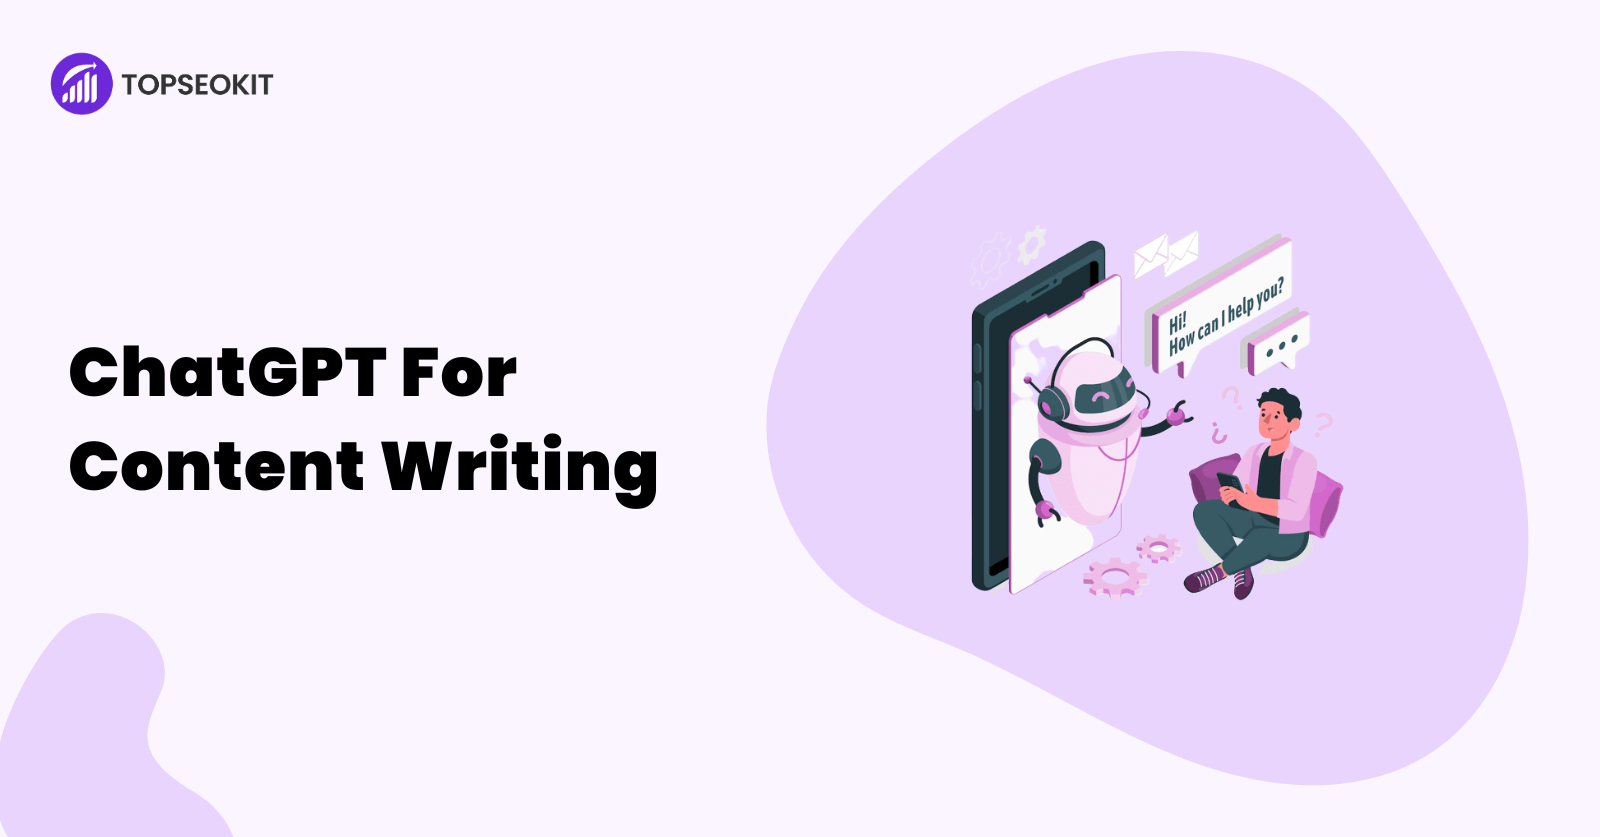 Tell me the best way to use ChatGPT for content writing?